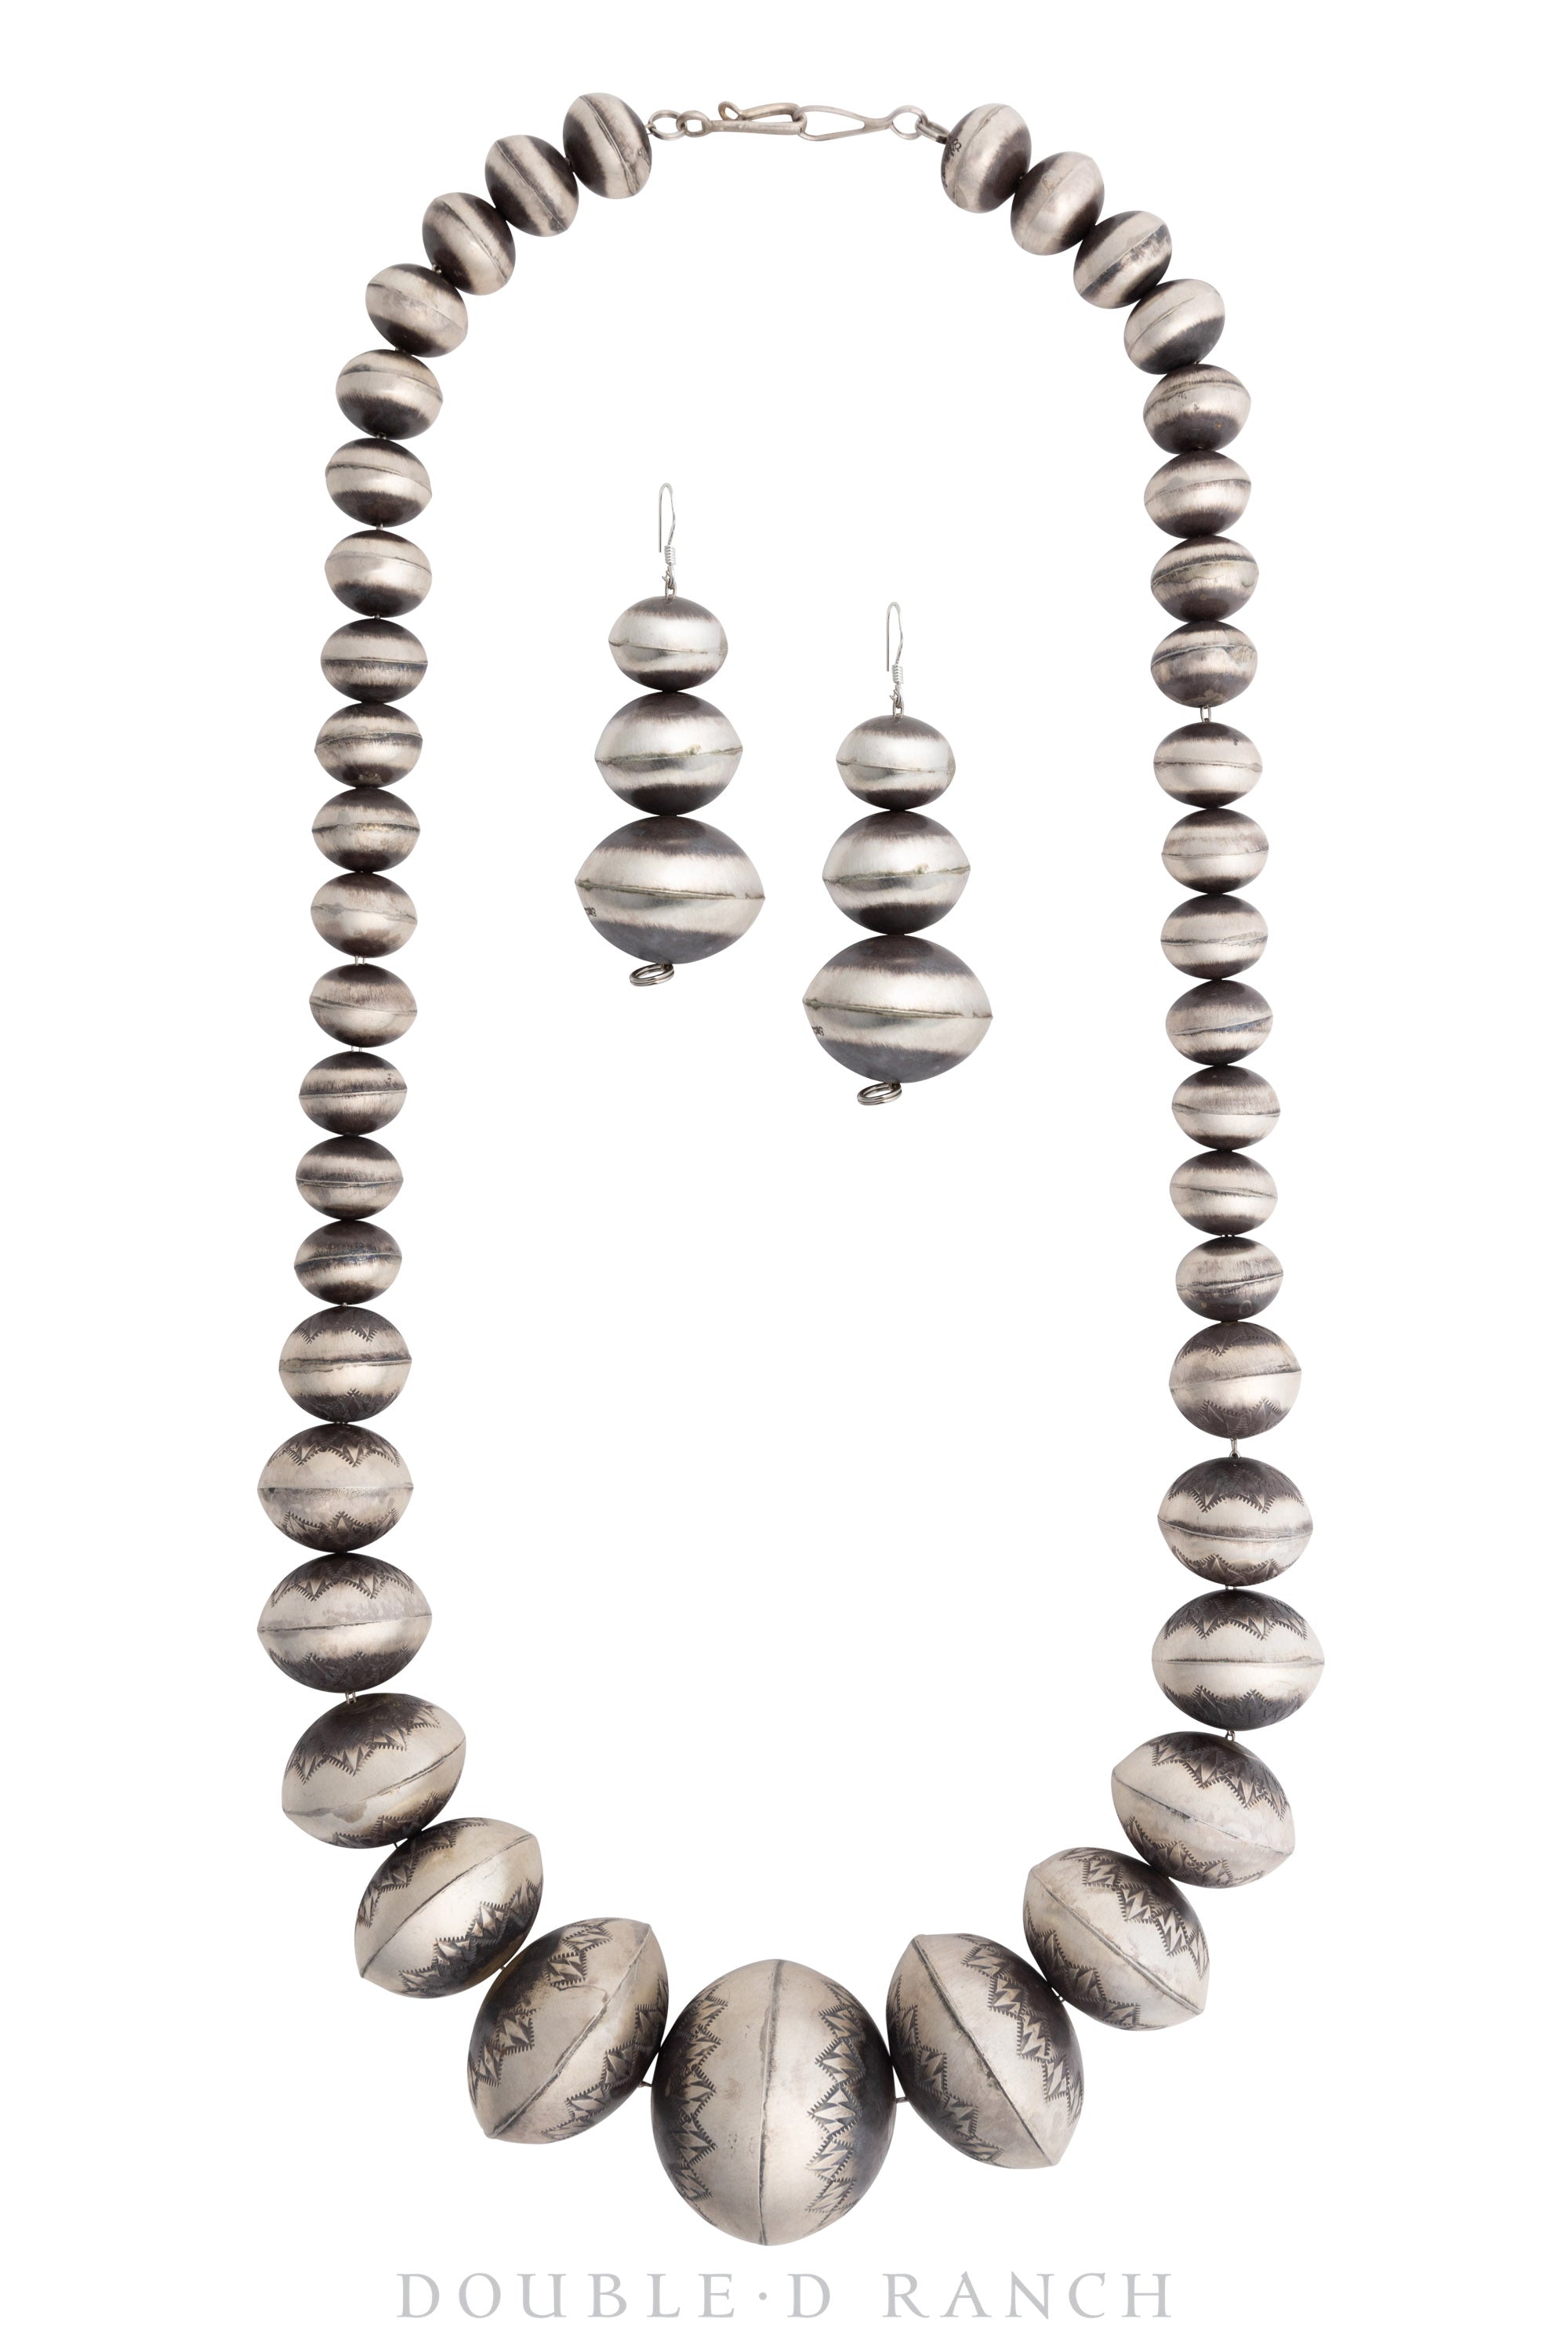 JN1711B, Necklace, Desert Pearls, Sterling Silver, Included Matching Earrings, Contemporary, 1711B